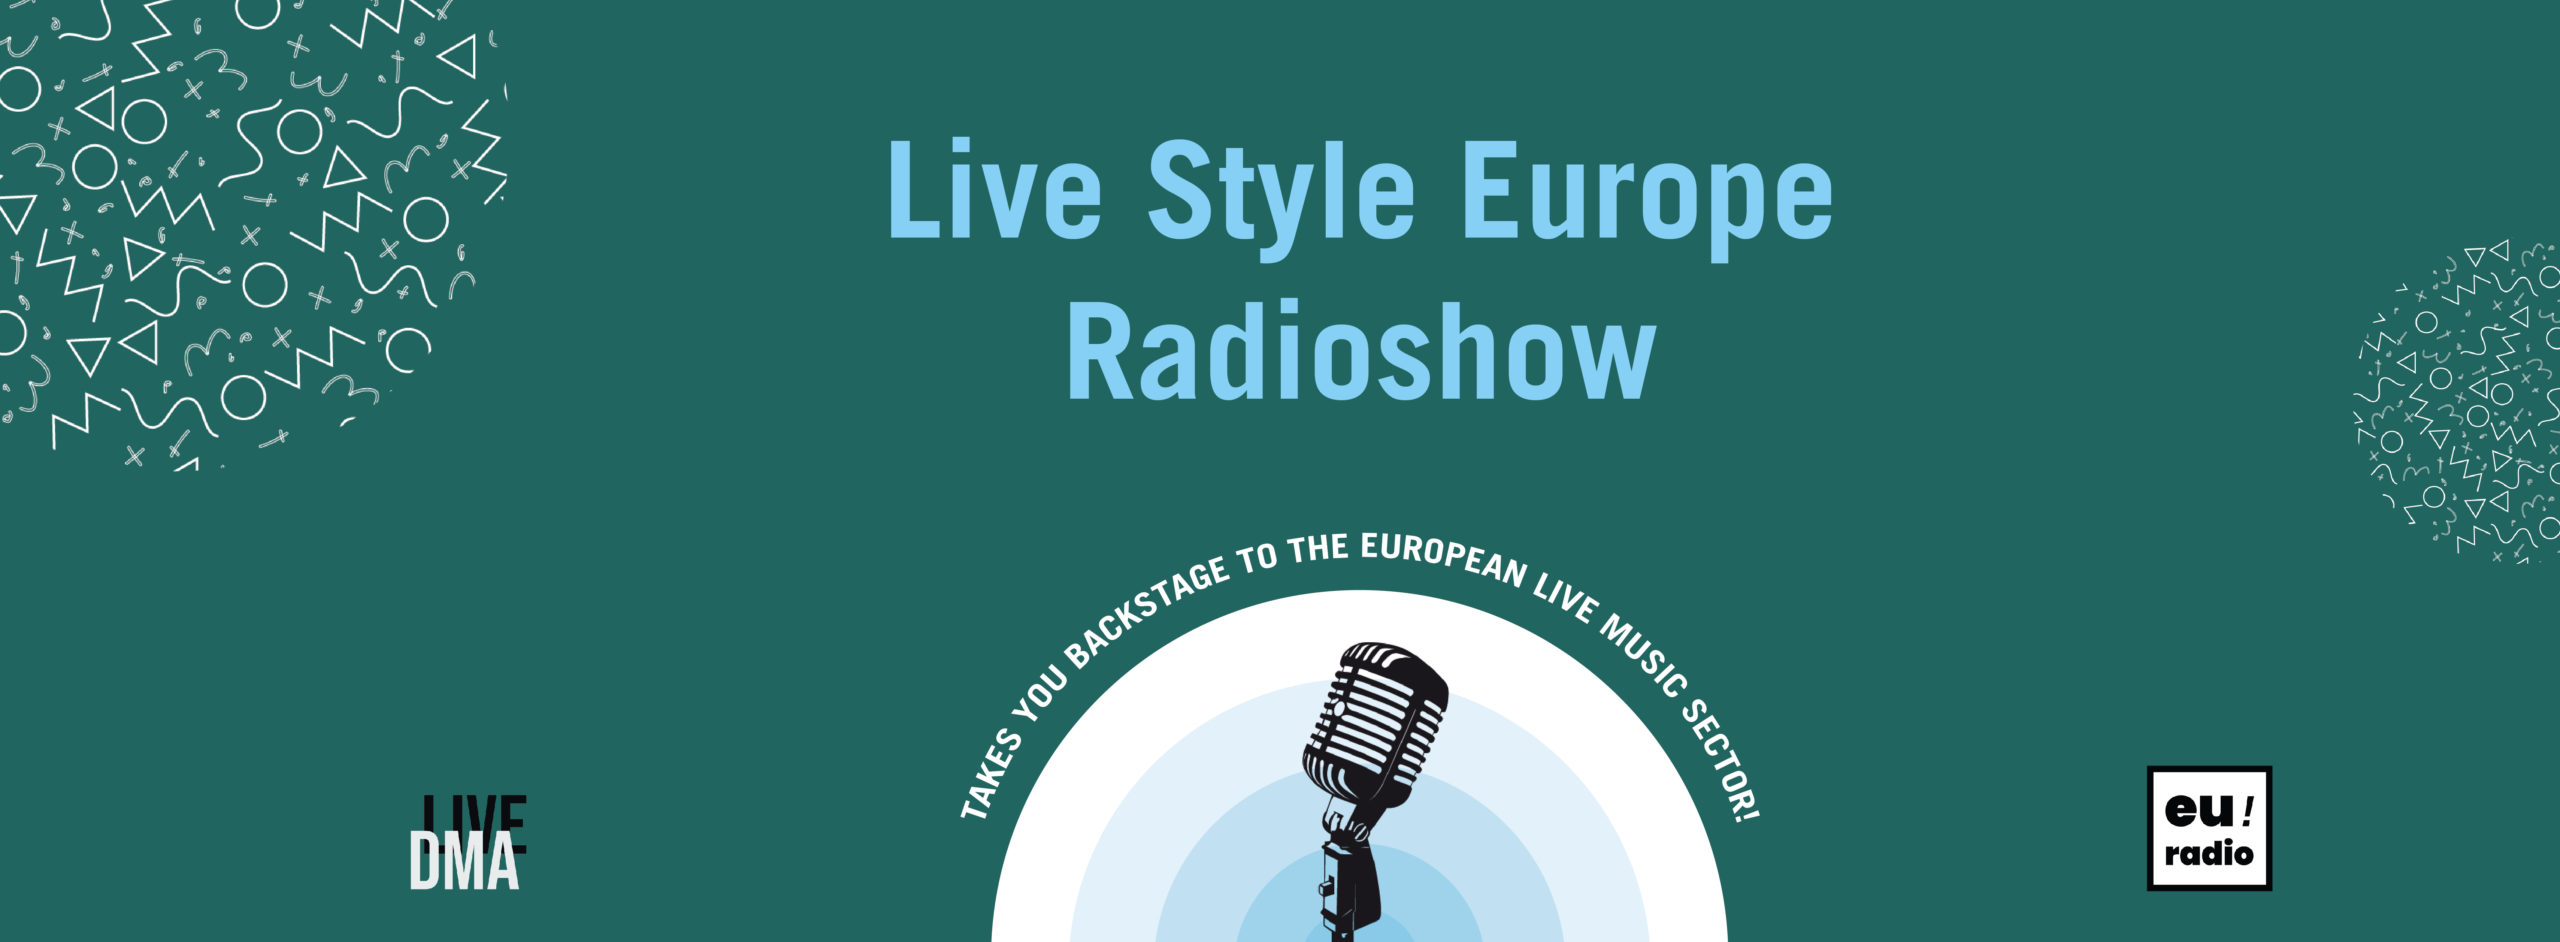 LIVE STYLE EUROPE PODCASTS - Live DMA